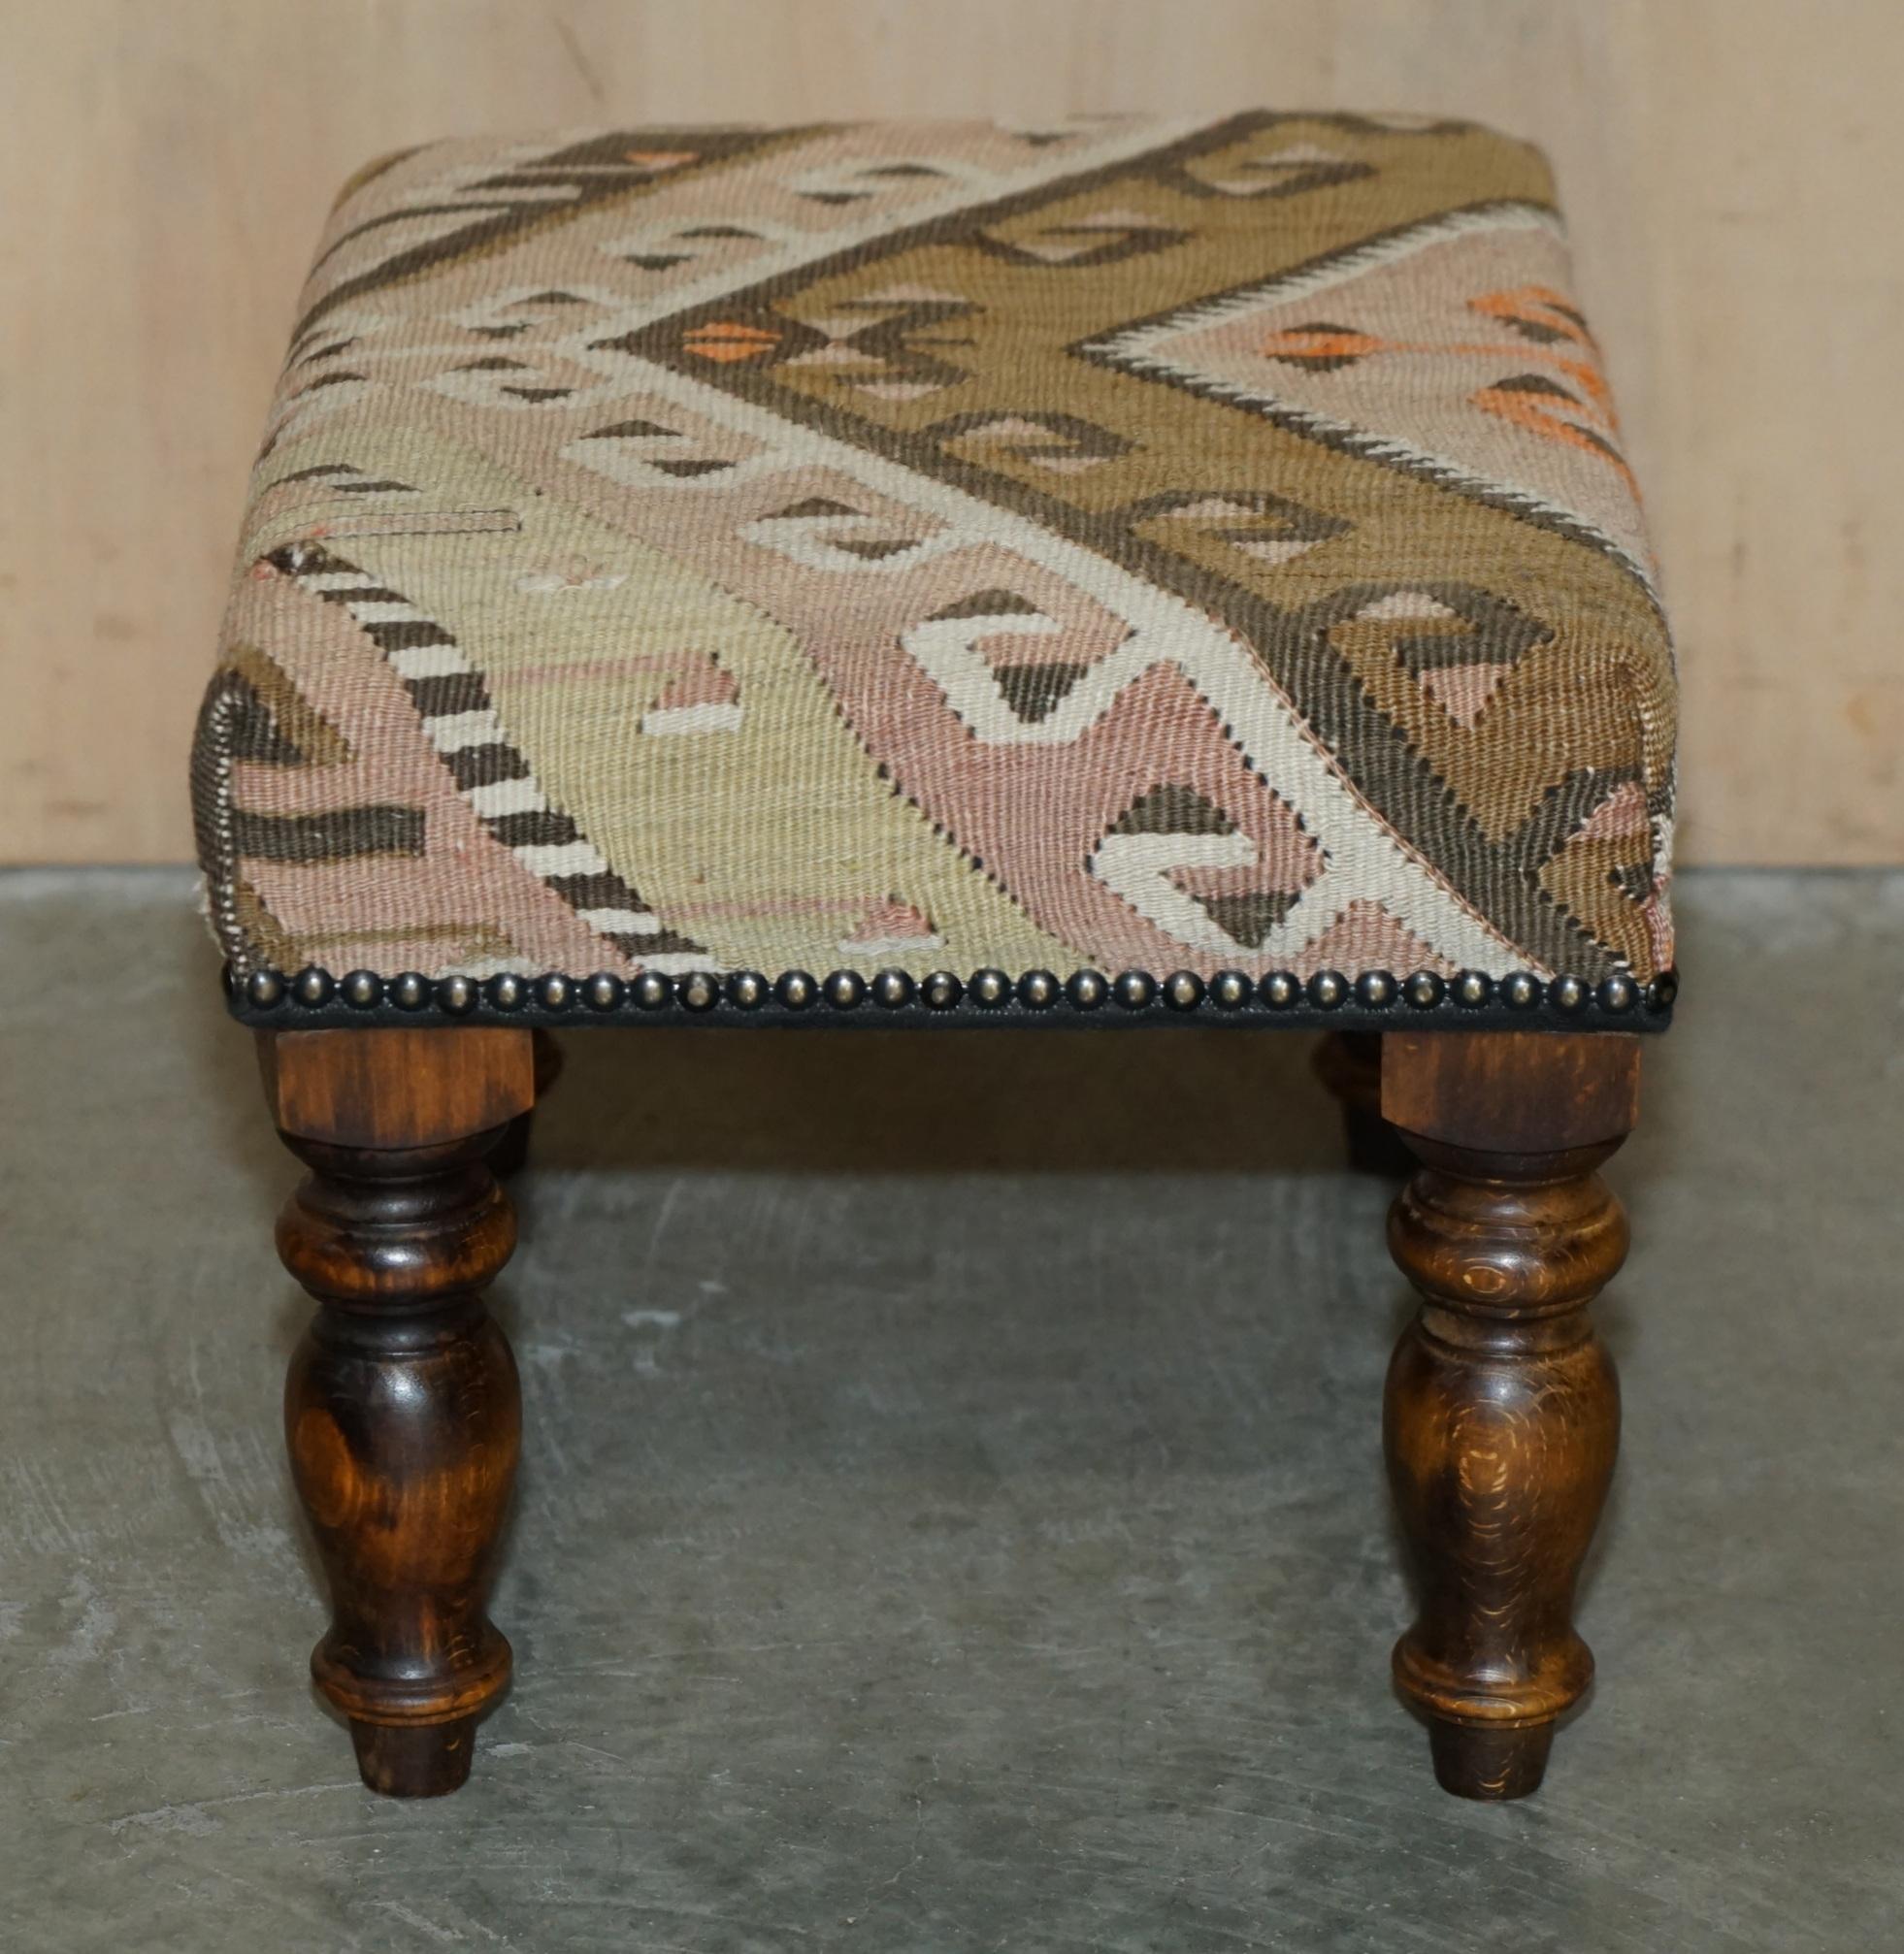 STUNNiNG & COLLECTable VINTAGE GEORGE SMITH CHELSEA KILIM FOOTSTOOL OTTOMAN (Polster) im Angebot